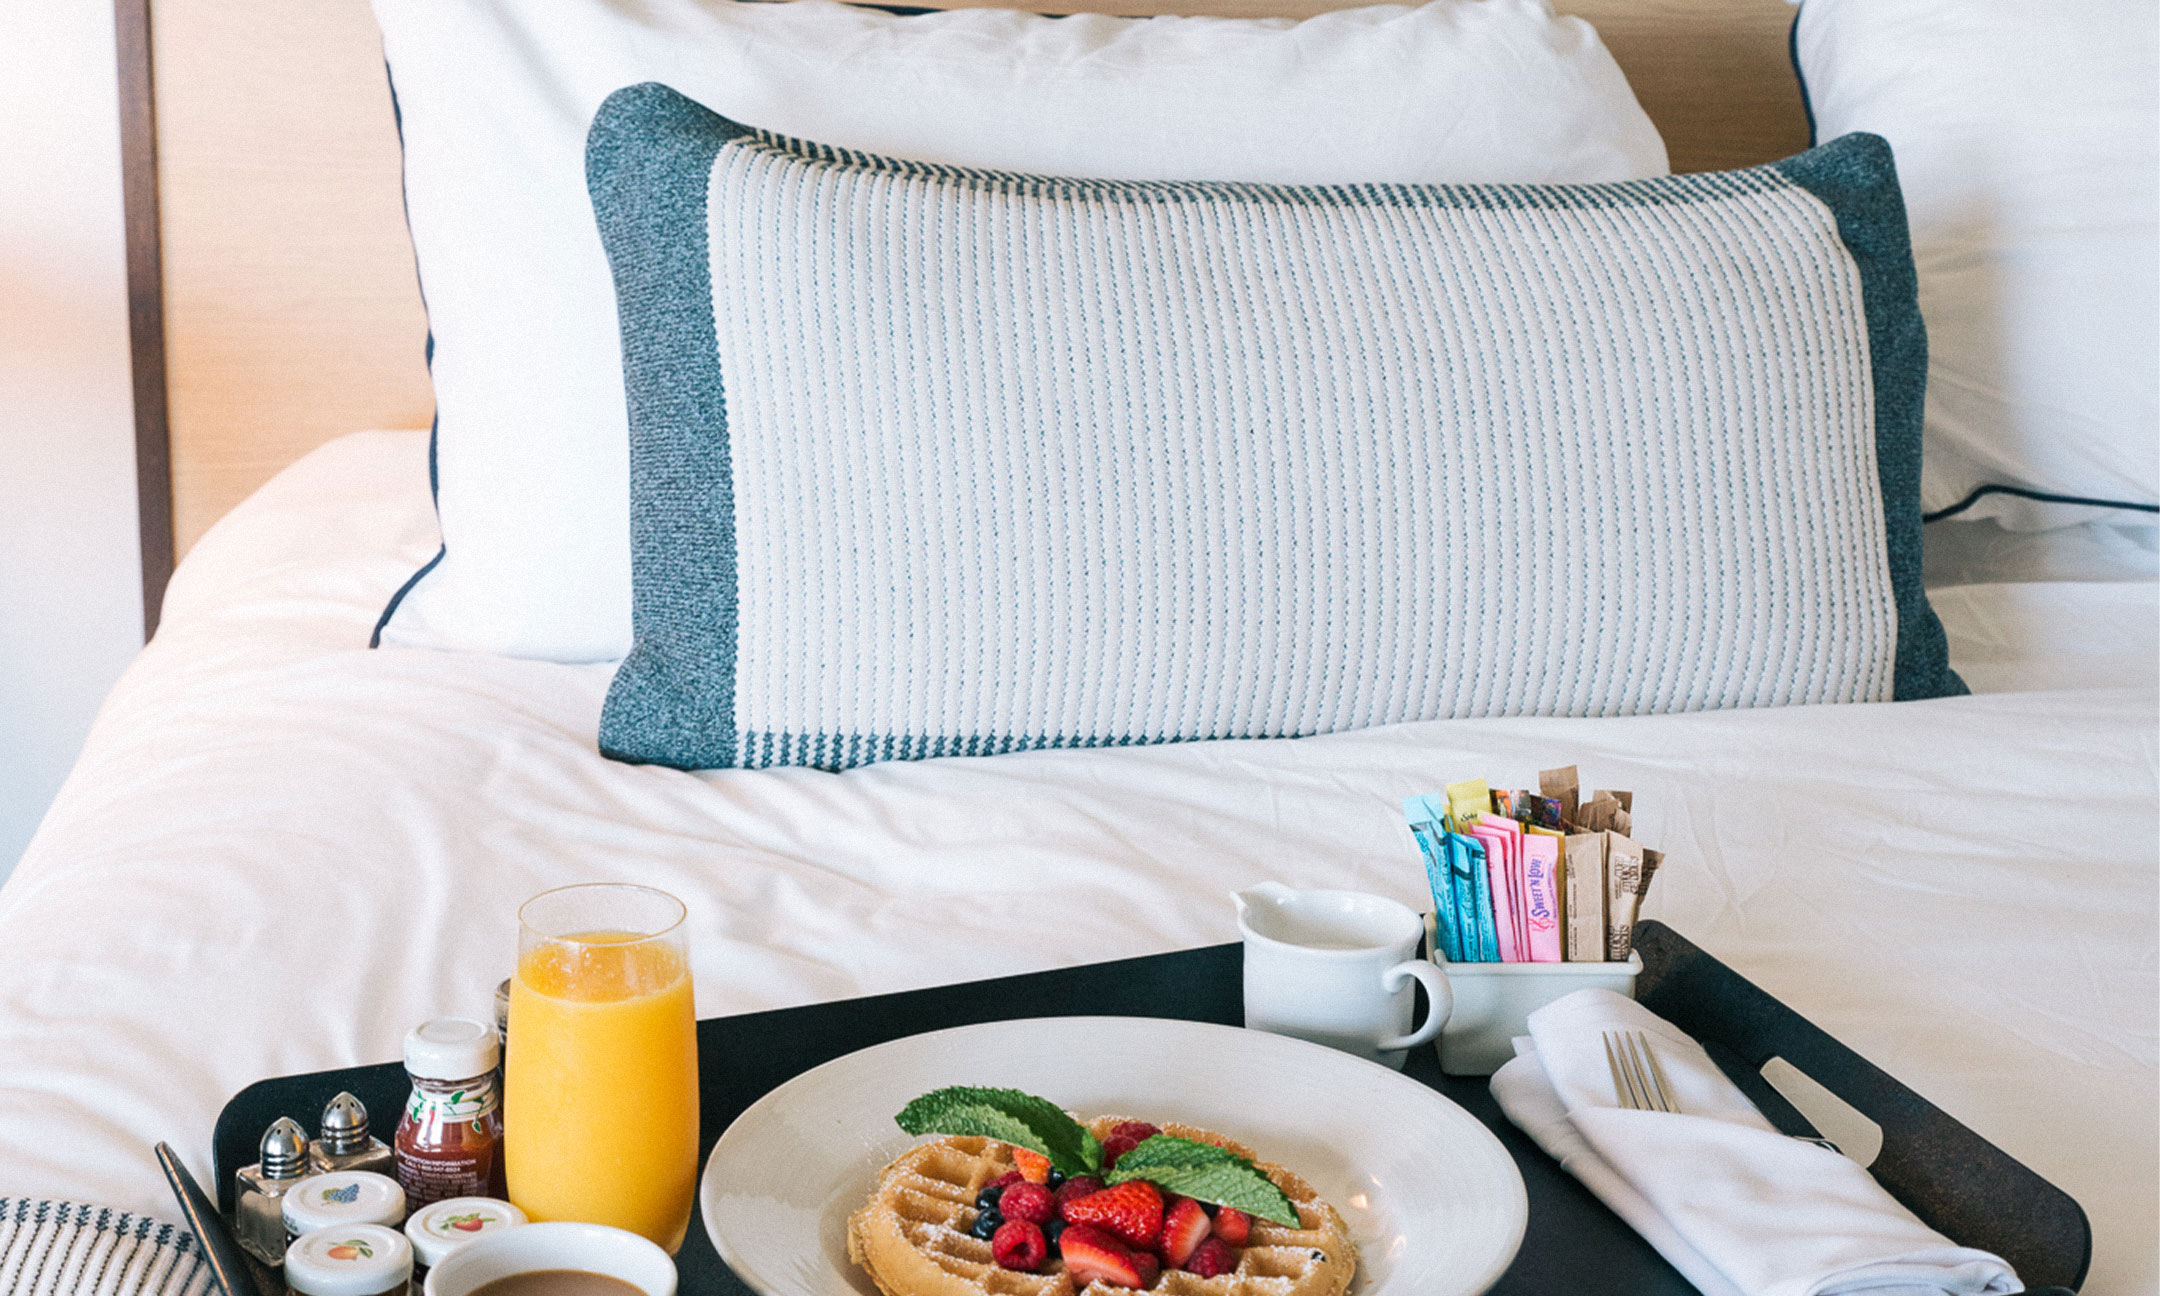 Breakfast tray with waffle, coffee, and orange juice on bed